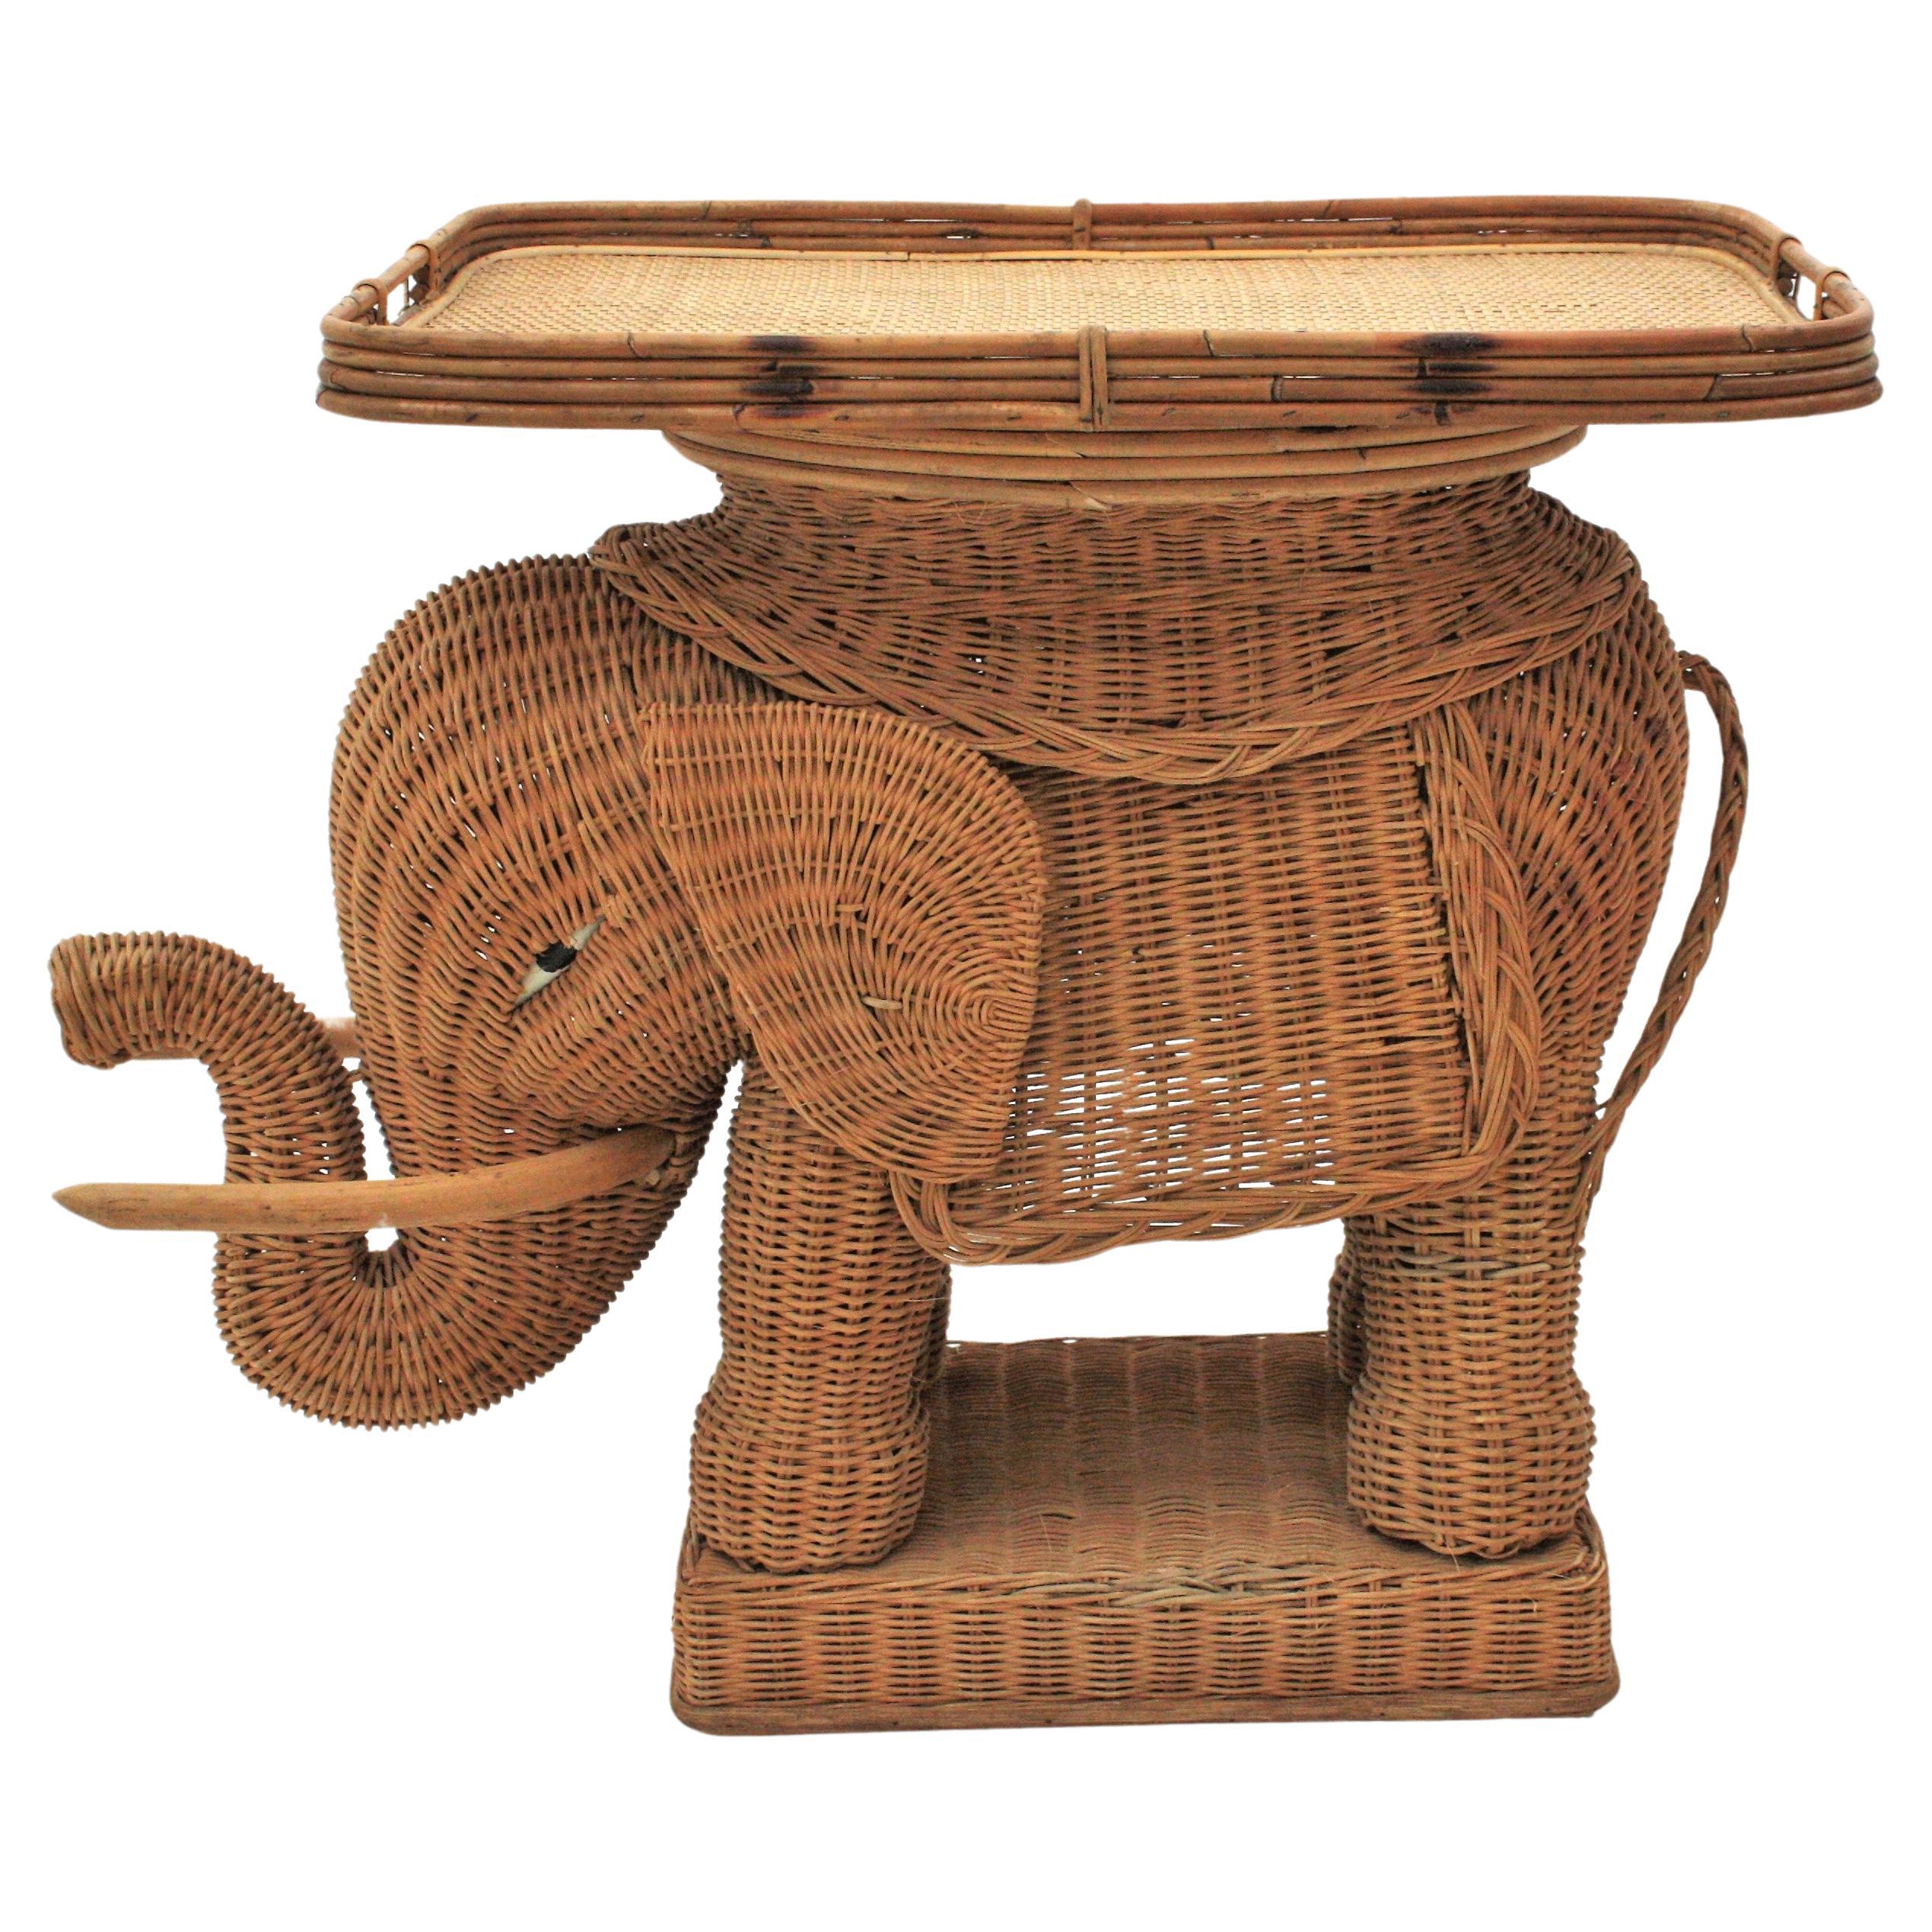 Eye-catching woven rattan end table or drinks table with removable tray top. France, 1940s-1950s.
This elephant shaped end table stand was beautifully constructed in hand braided rattan / wicker accented with wood tusks. The rectangular tray top is